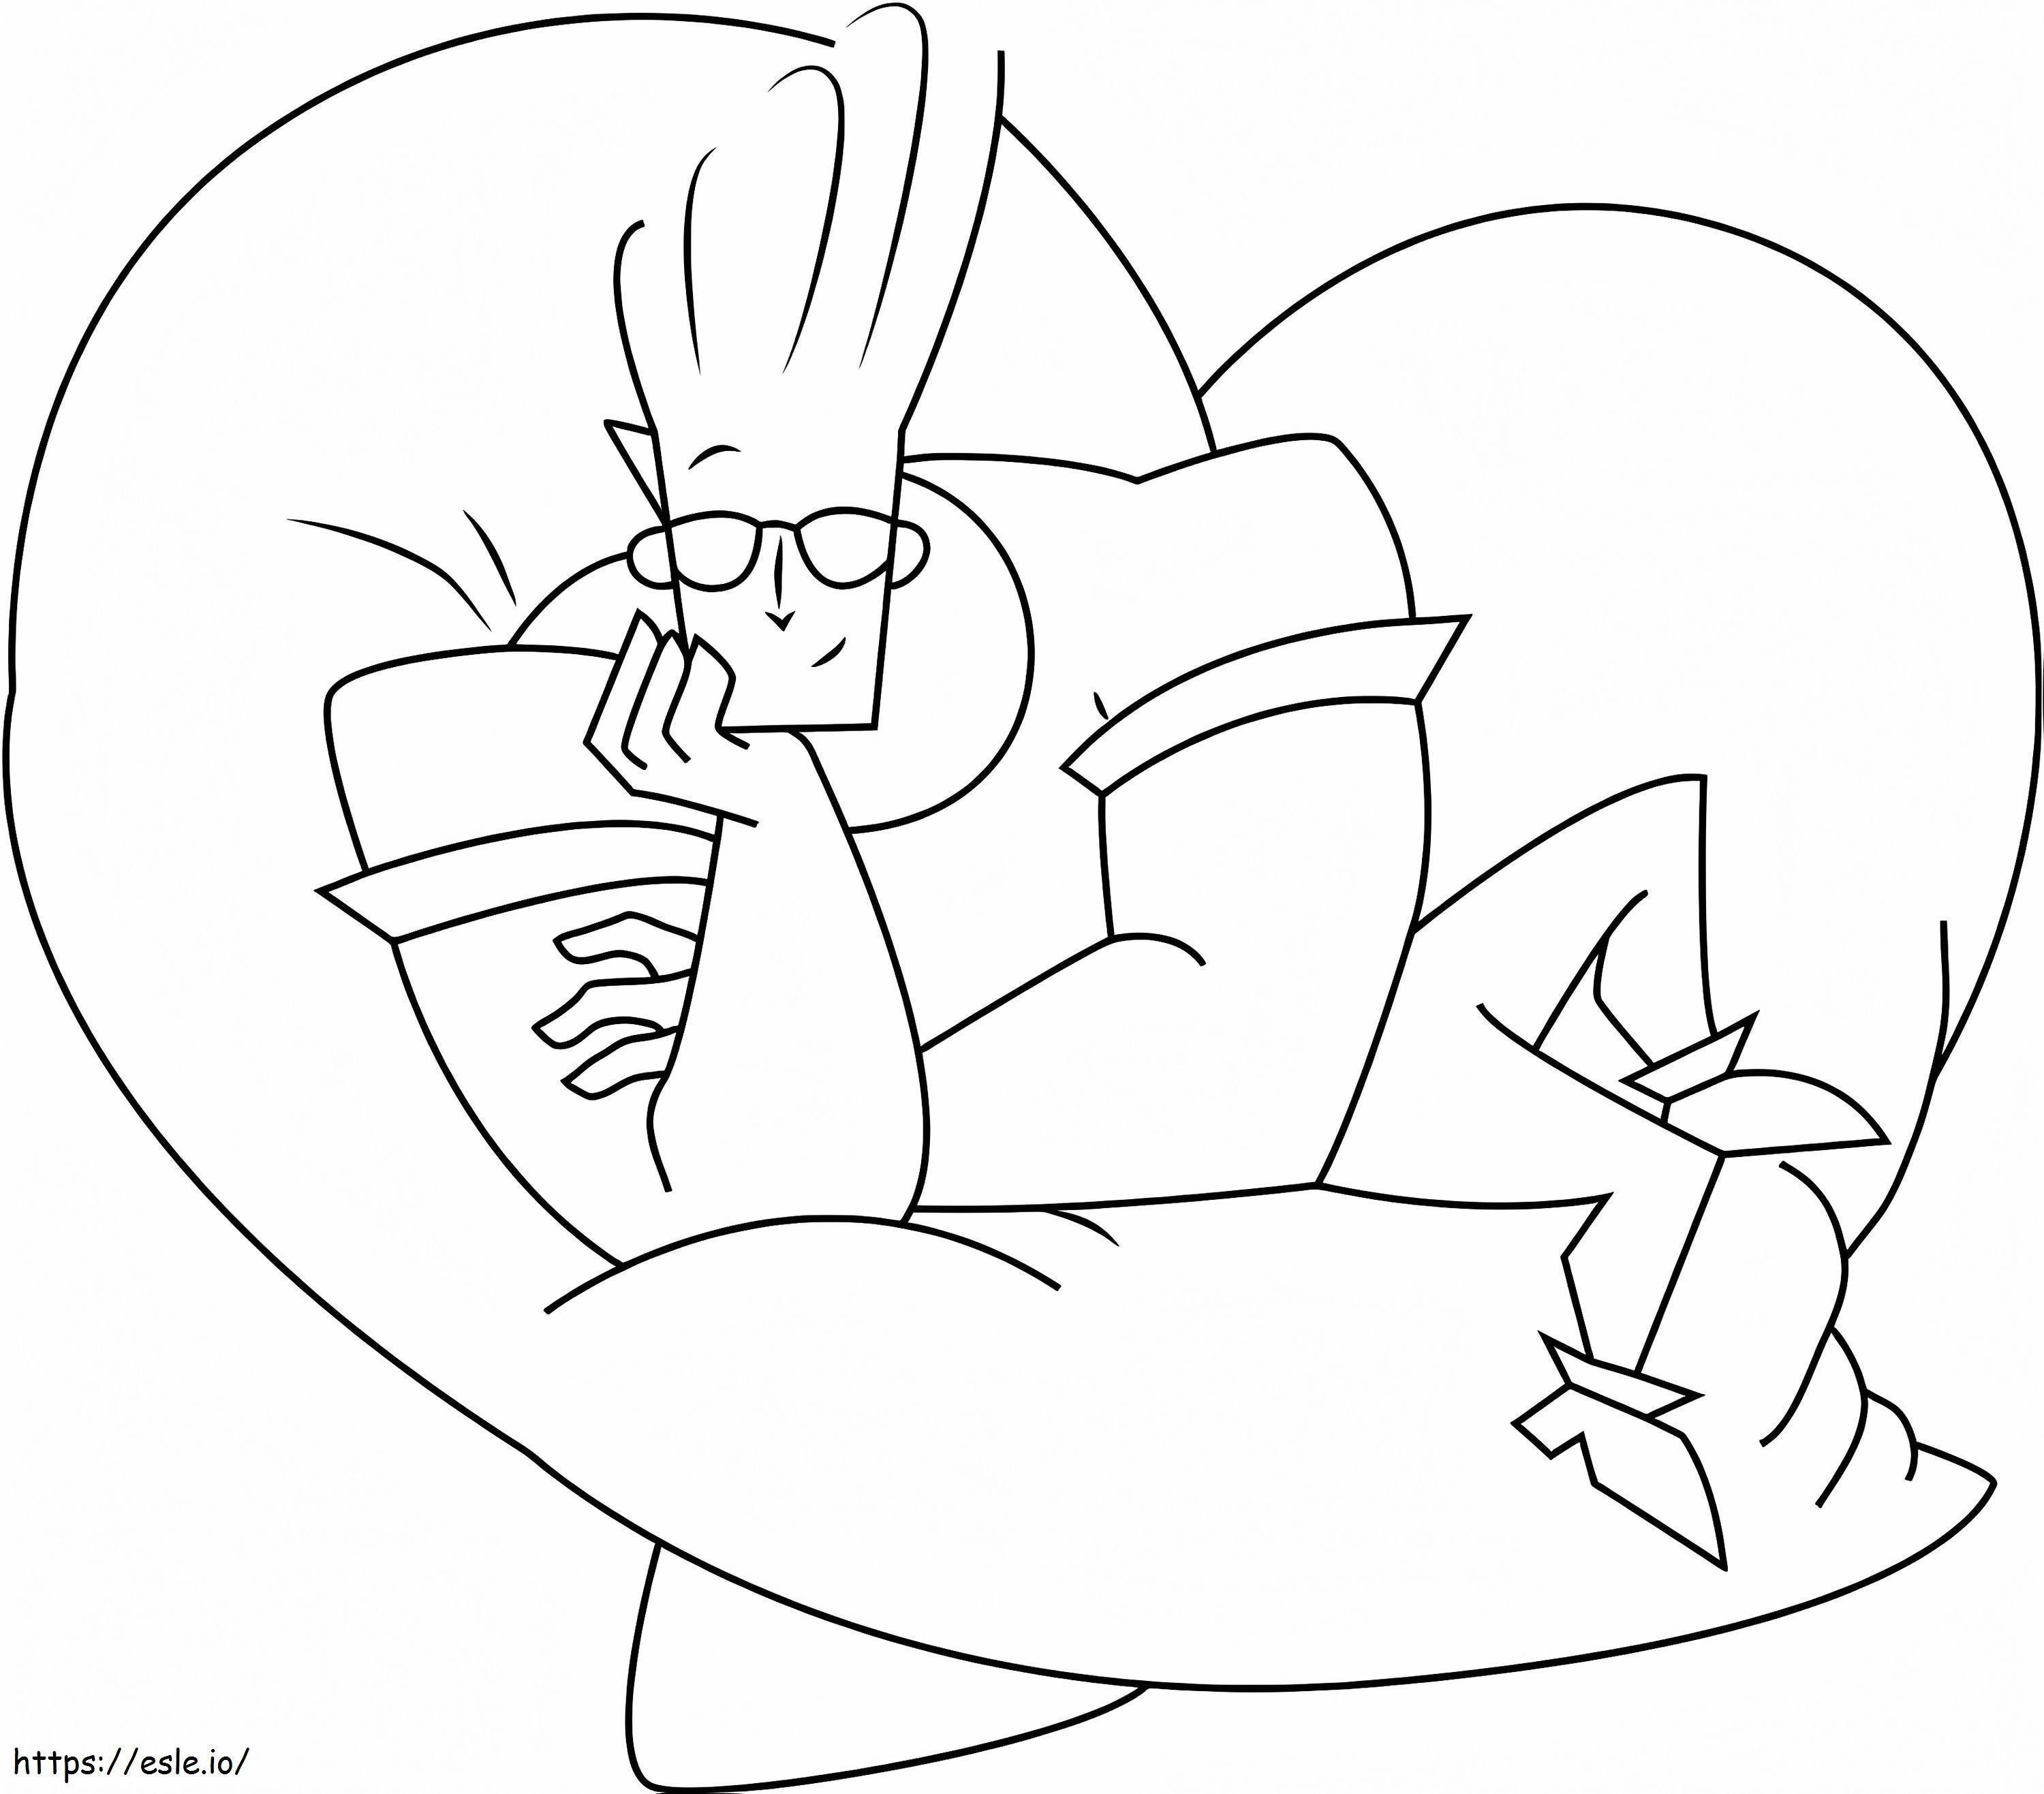 Smiling Johnny Bravo coloring page